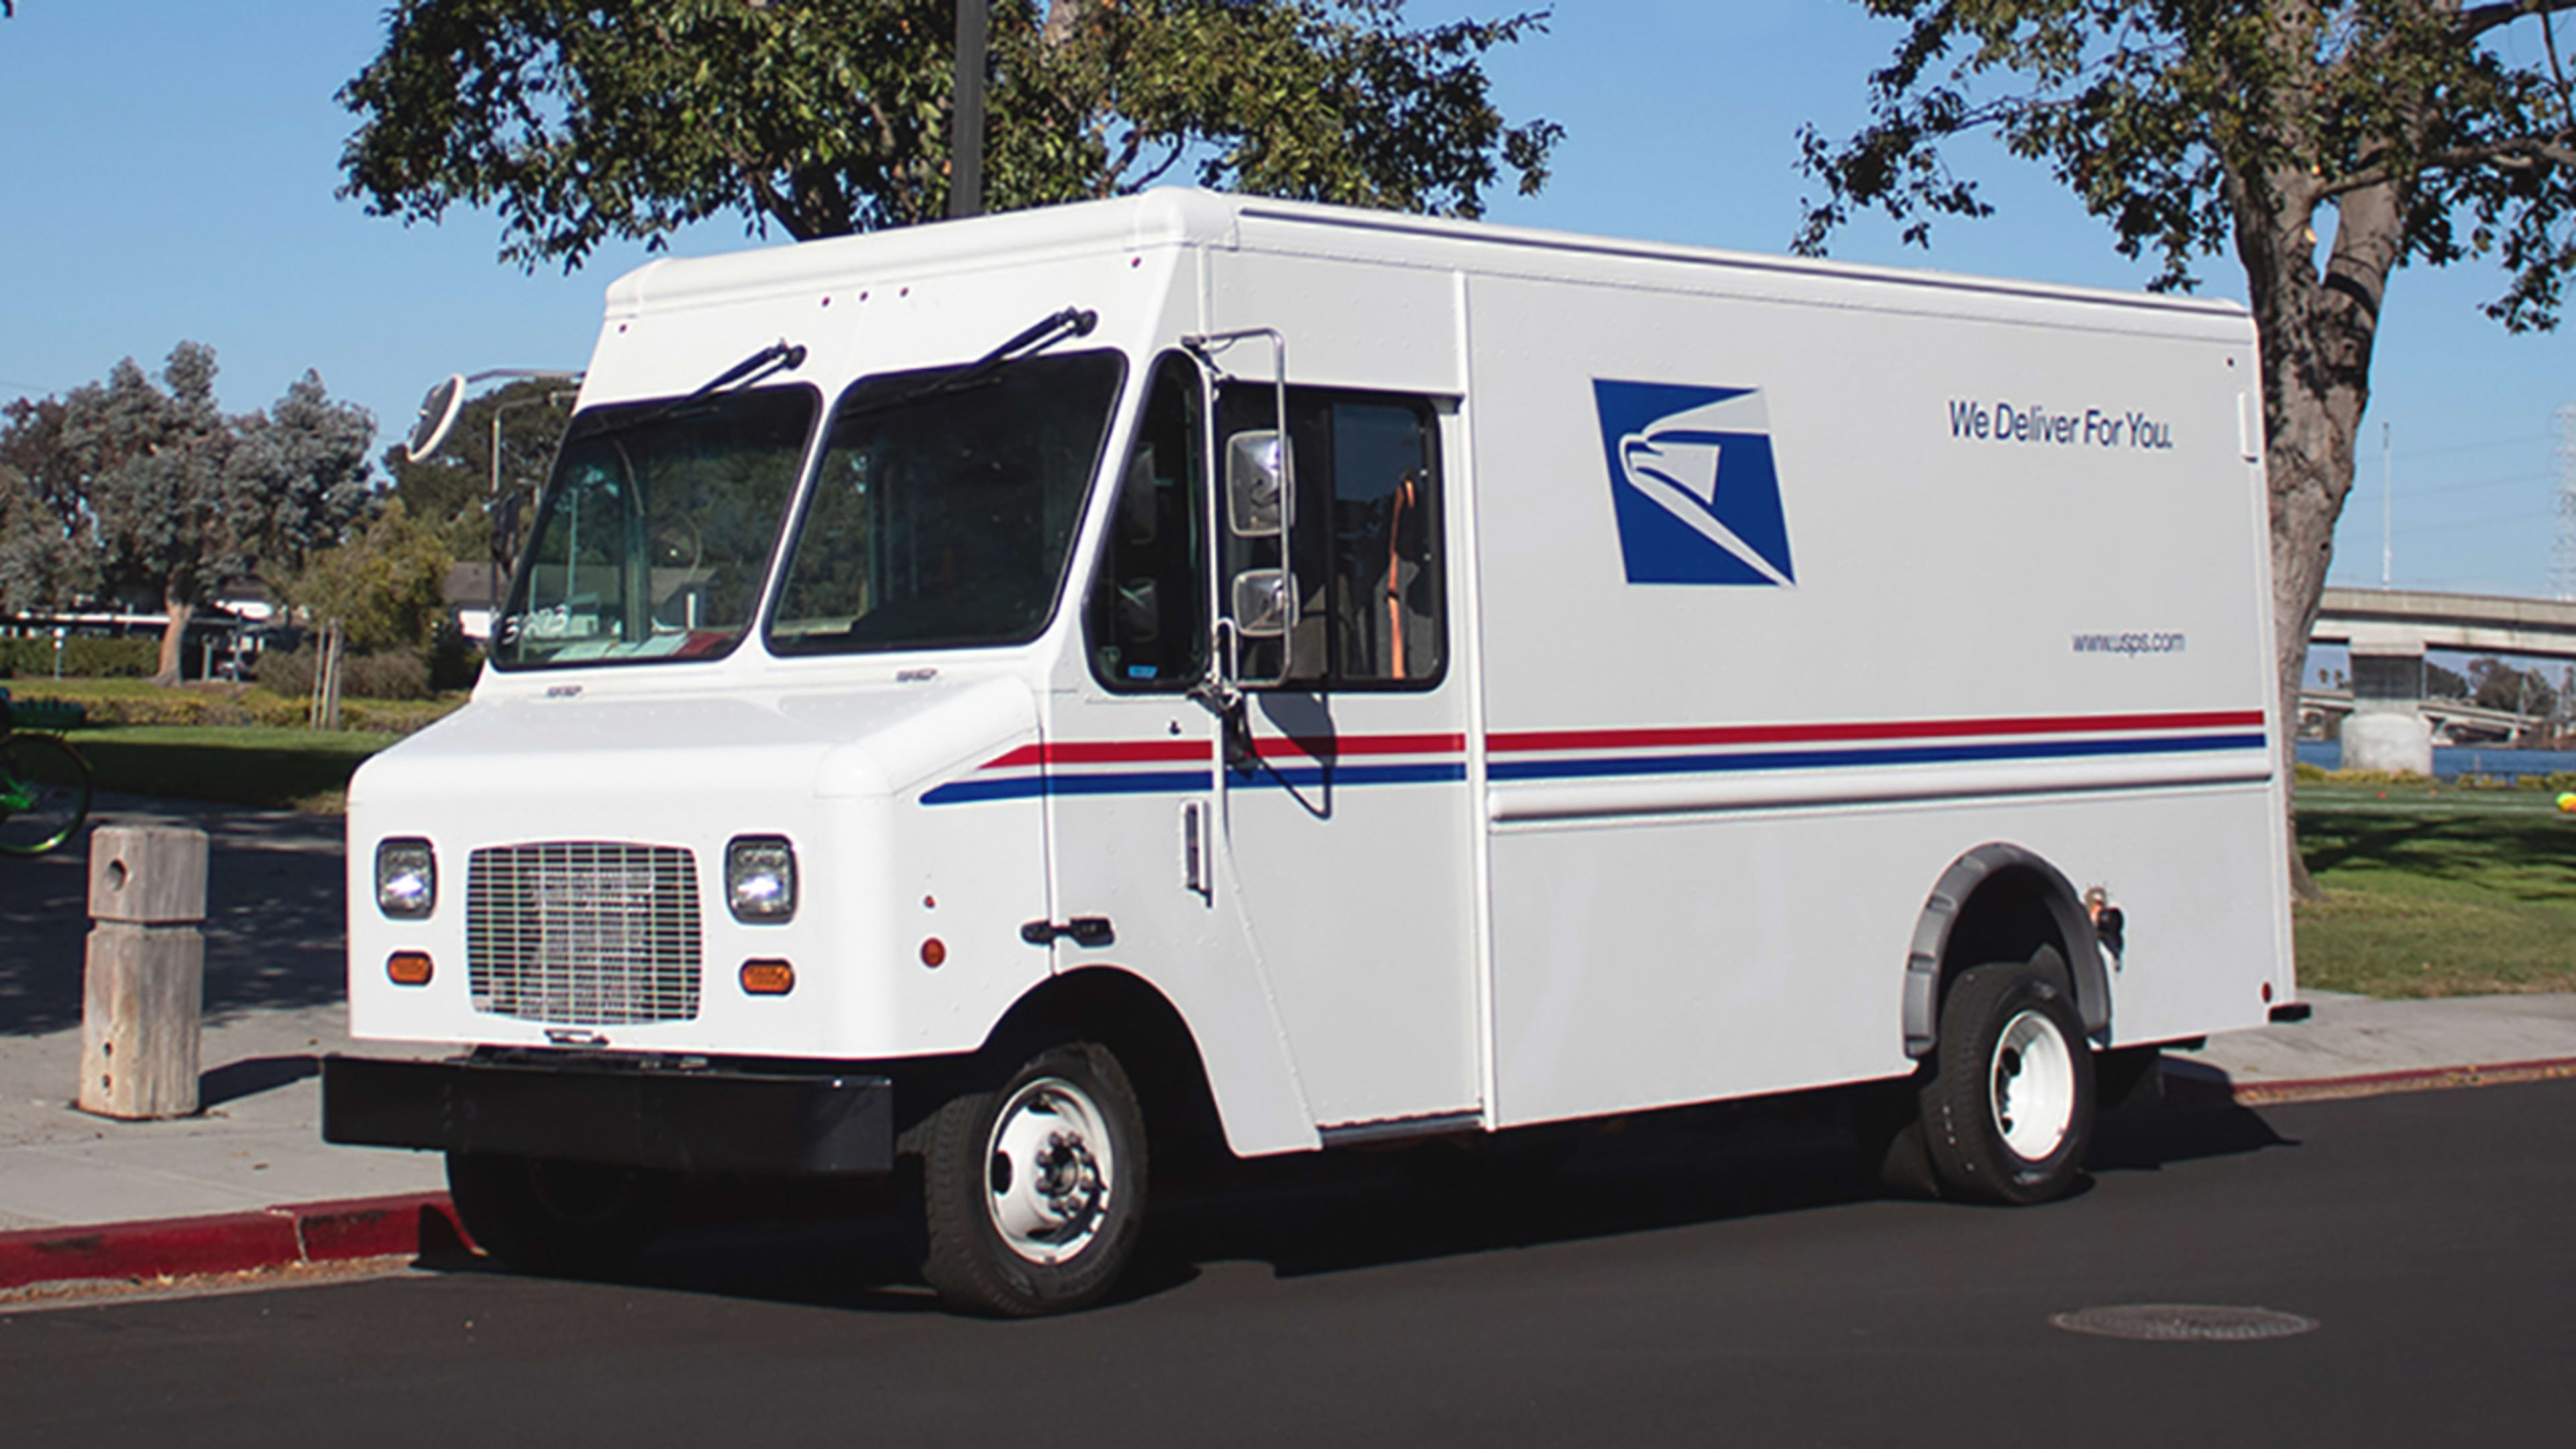 USPS is launching a test of electric delivery trucks